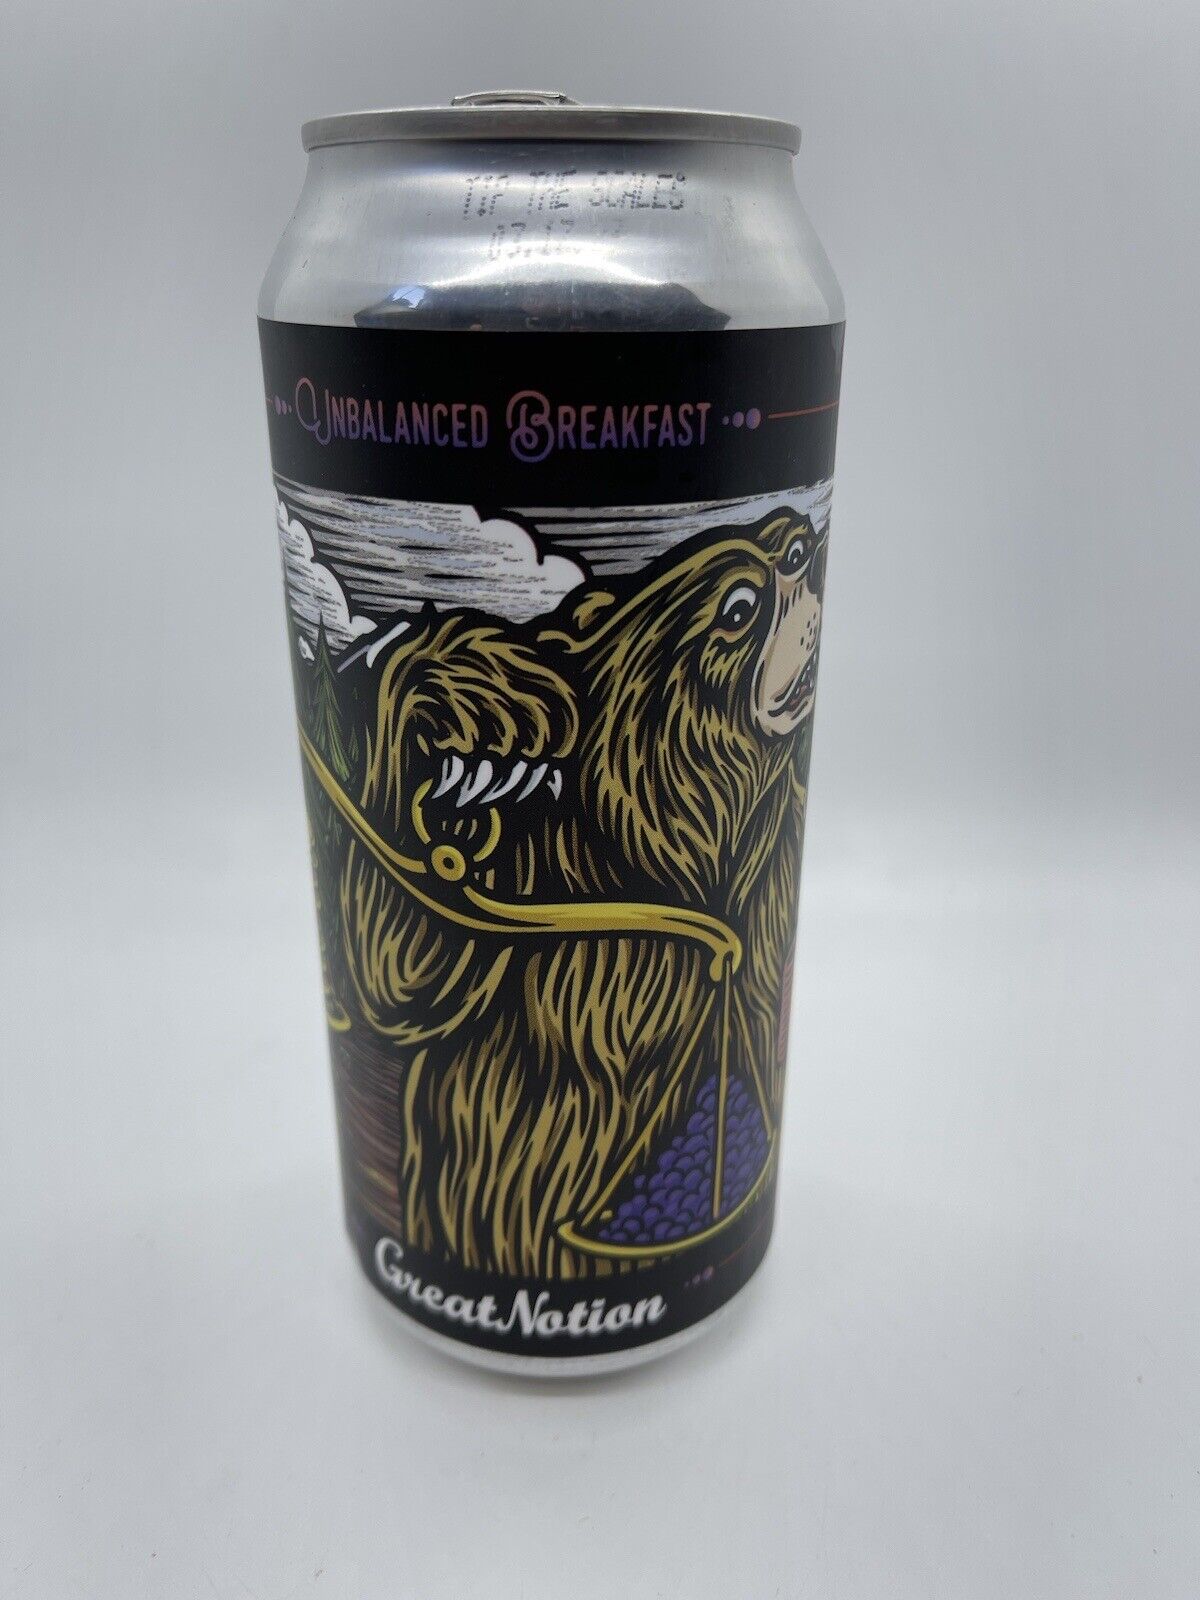 Great Notion Bear Stout EMPTY Can Collectible Craft Beer Portland PDX Oregon OR